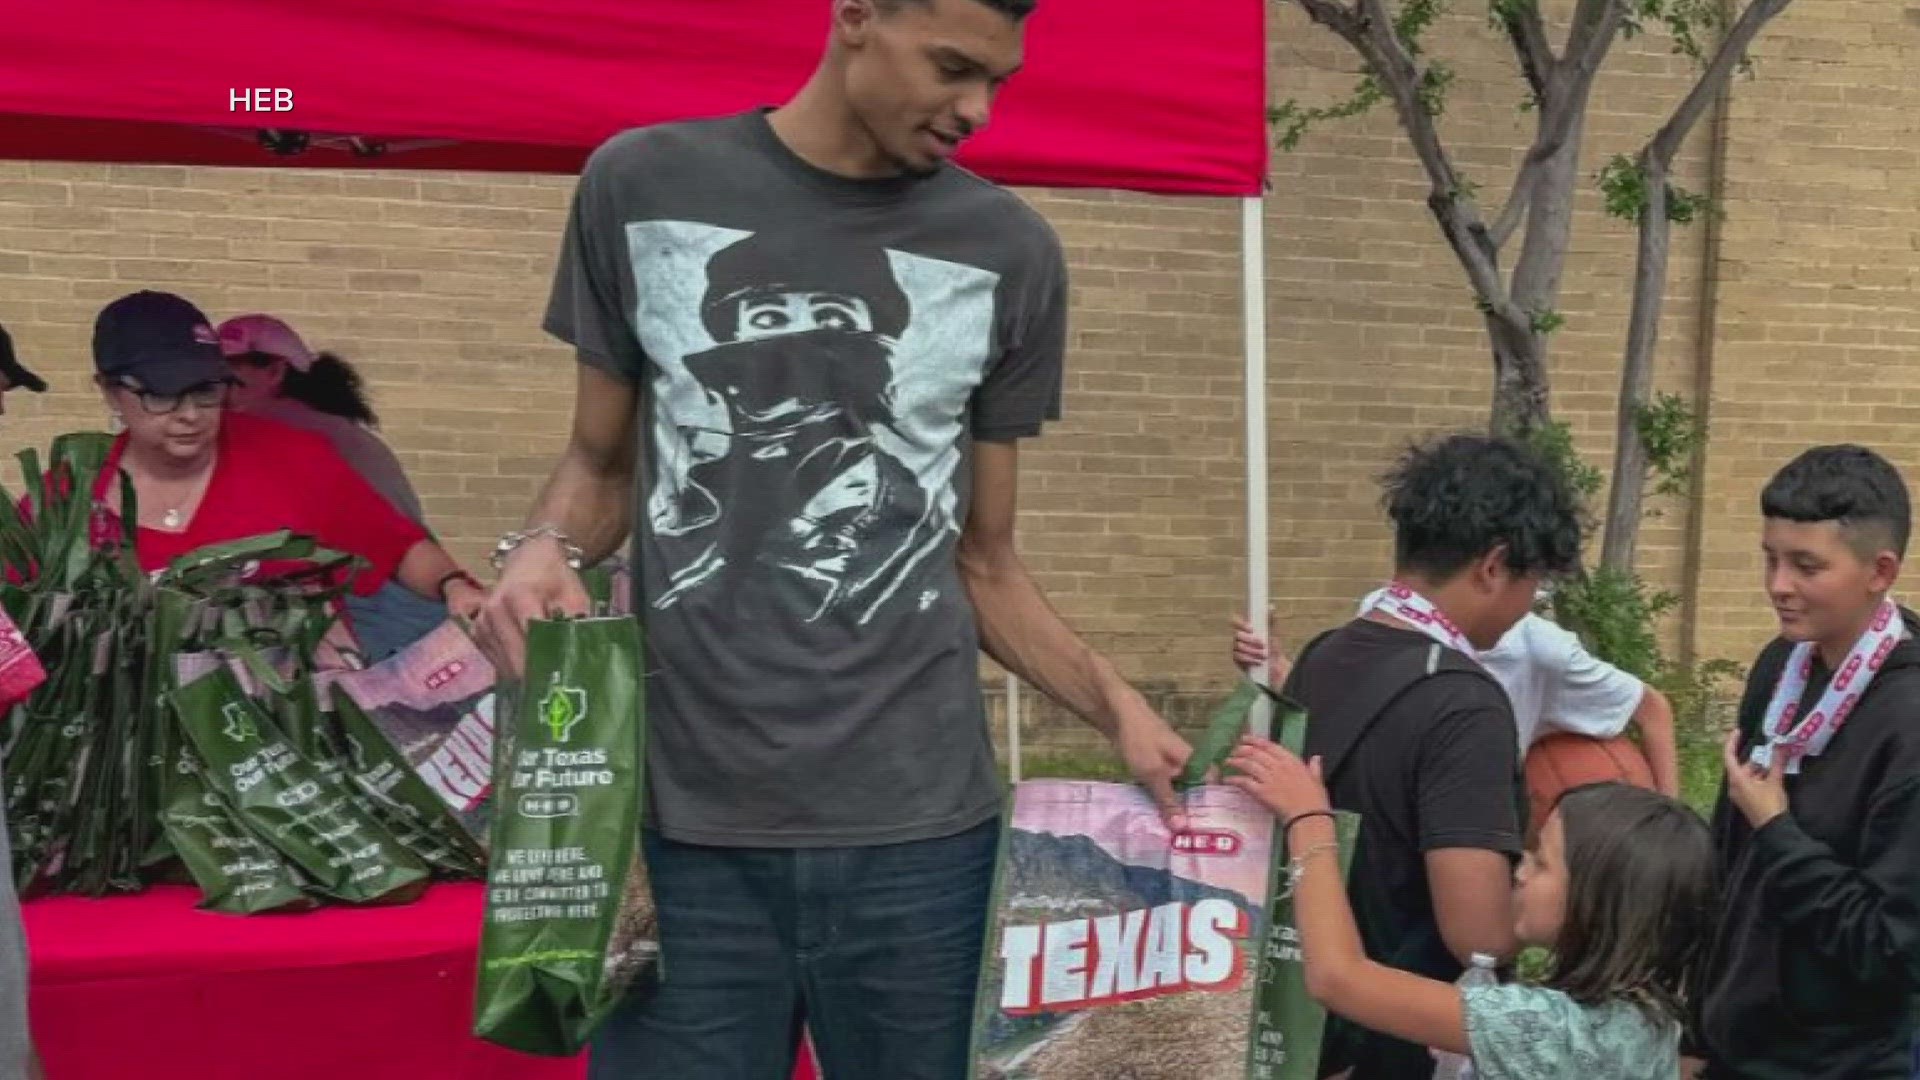 H-E-B and the Mayborn Museum in Waco are taking steps to care for the planet this Earth Day. Attend their events and find out how you can get involved.